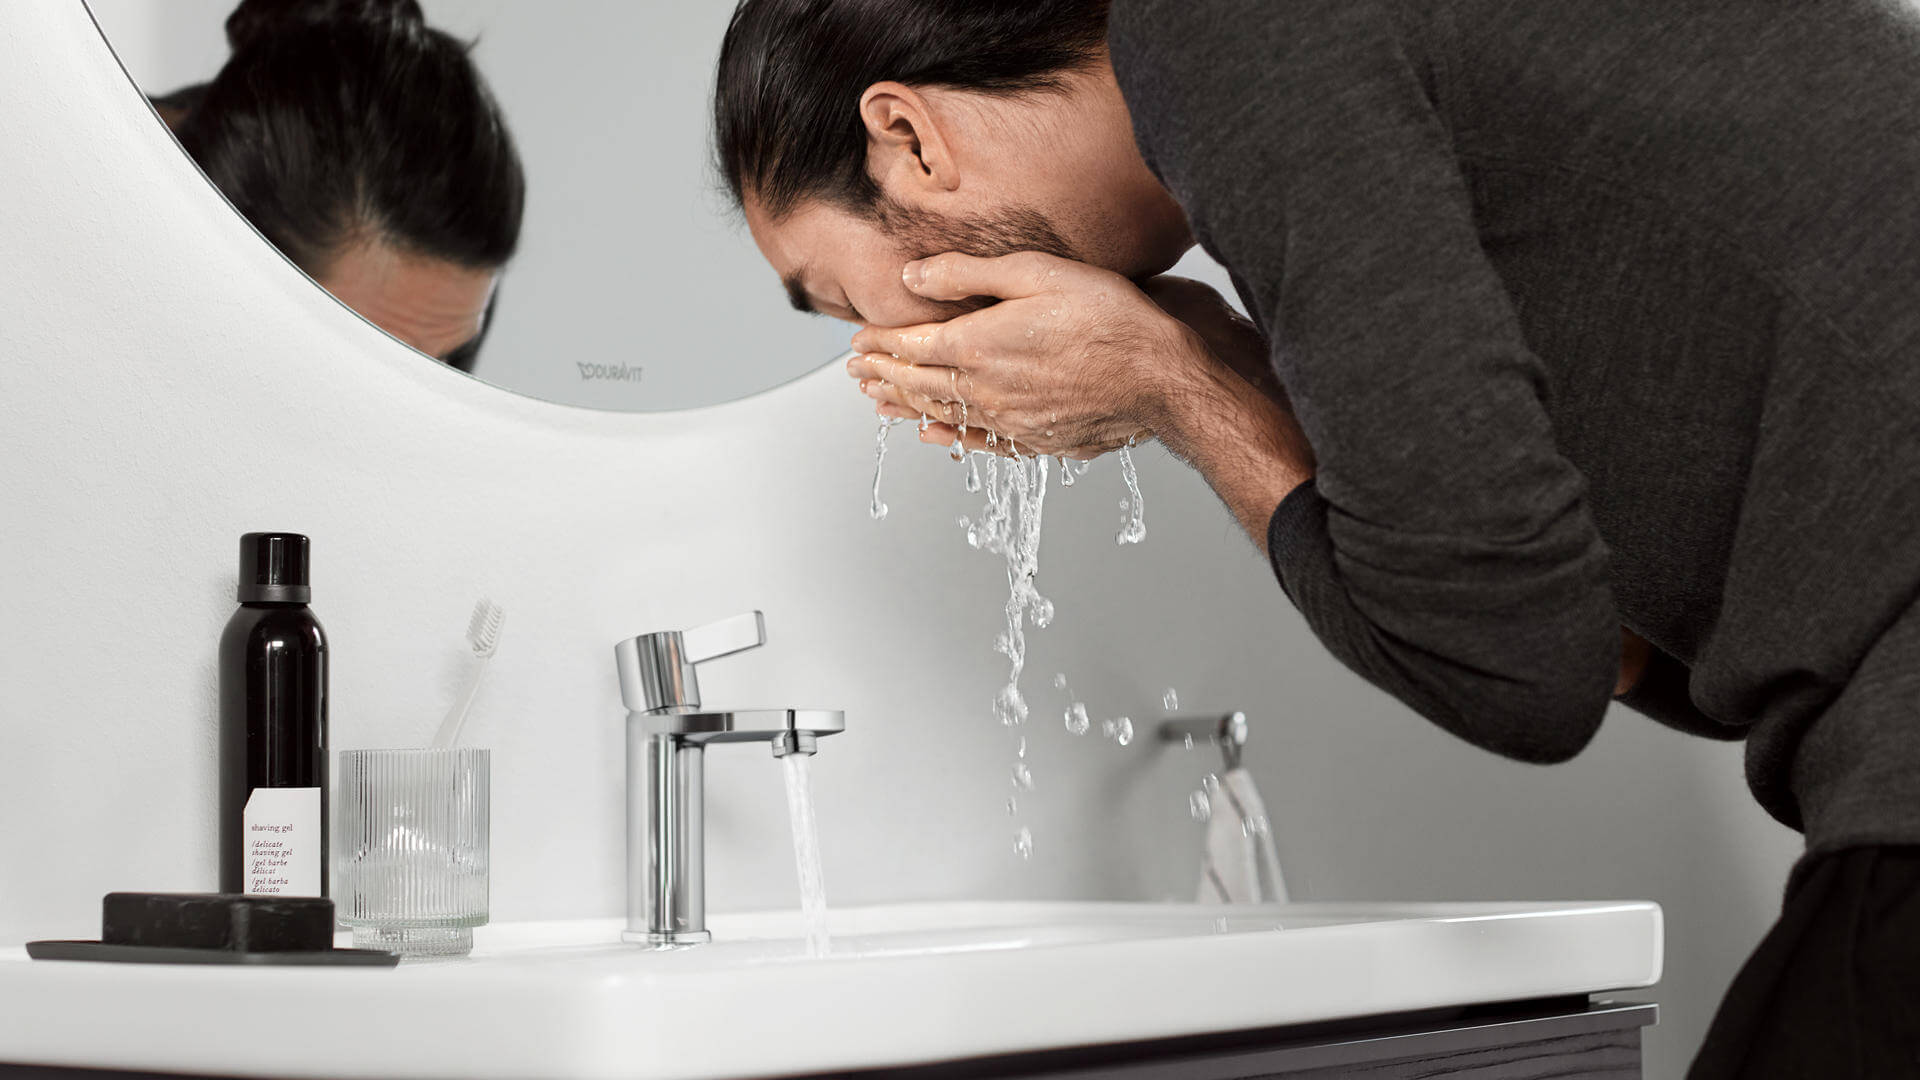 Man washes his face in front of D-Neo faucet
